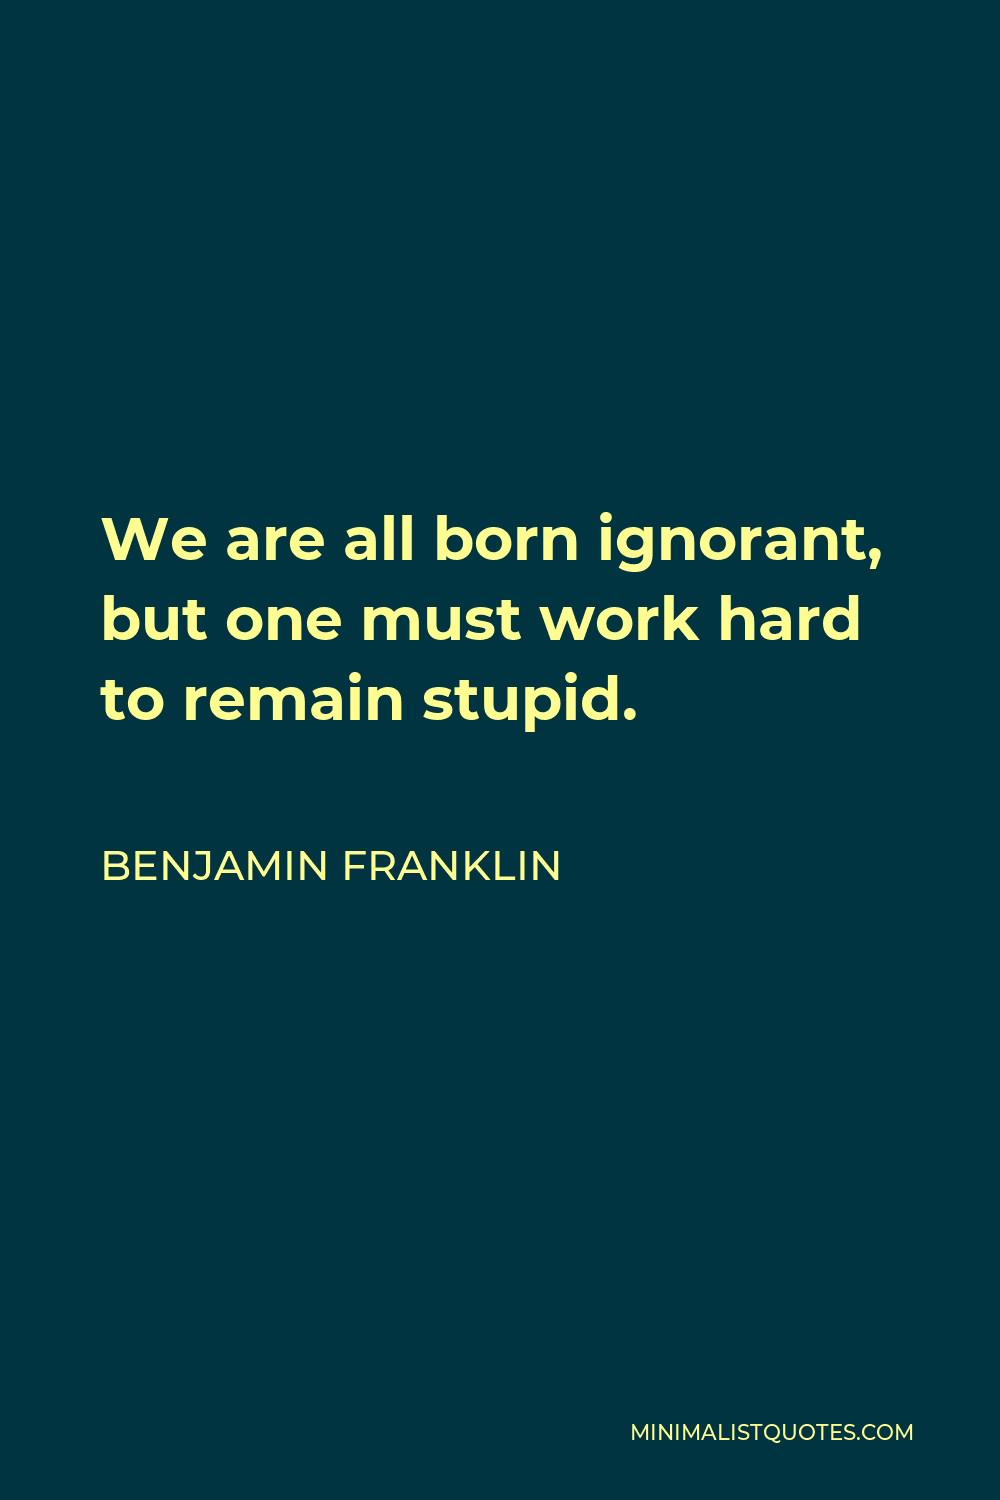 Benjamin Franklin Quote - We are all born ignorant, but one must work hard to remain stupid.